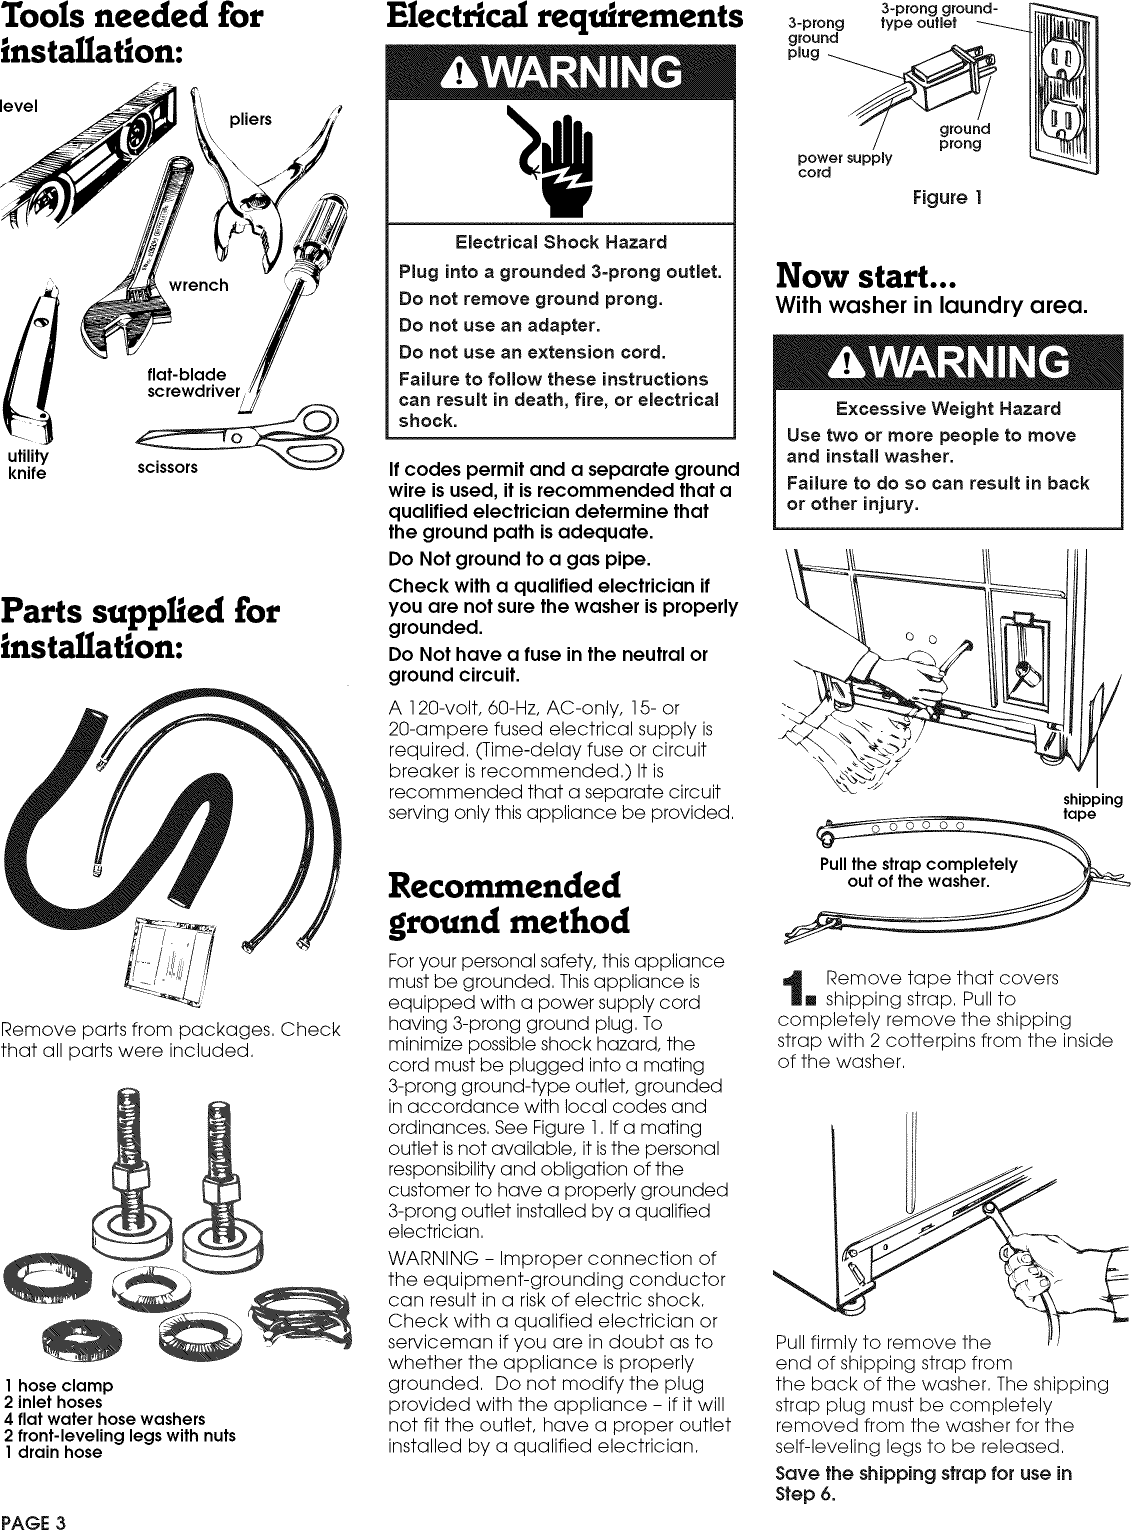 Page 3 of 8 - Whirlpool CA2762XYW0 User Manual  COMMERCIAL AUTOMATIC WASHER - Manuals And Guides 1101258L